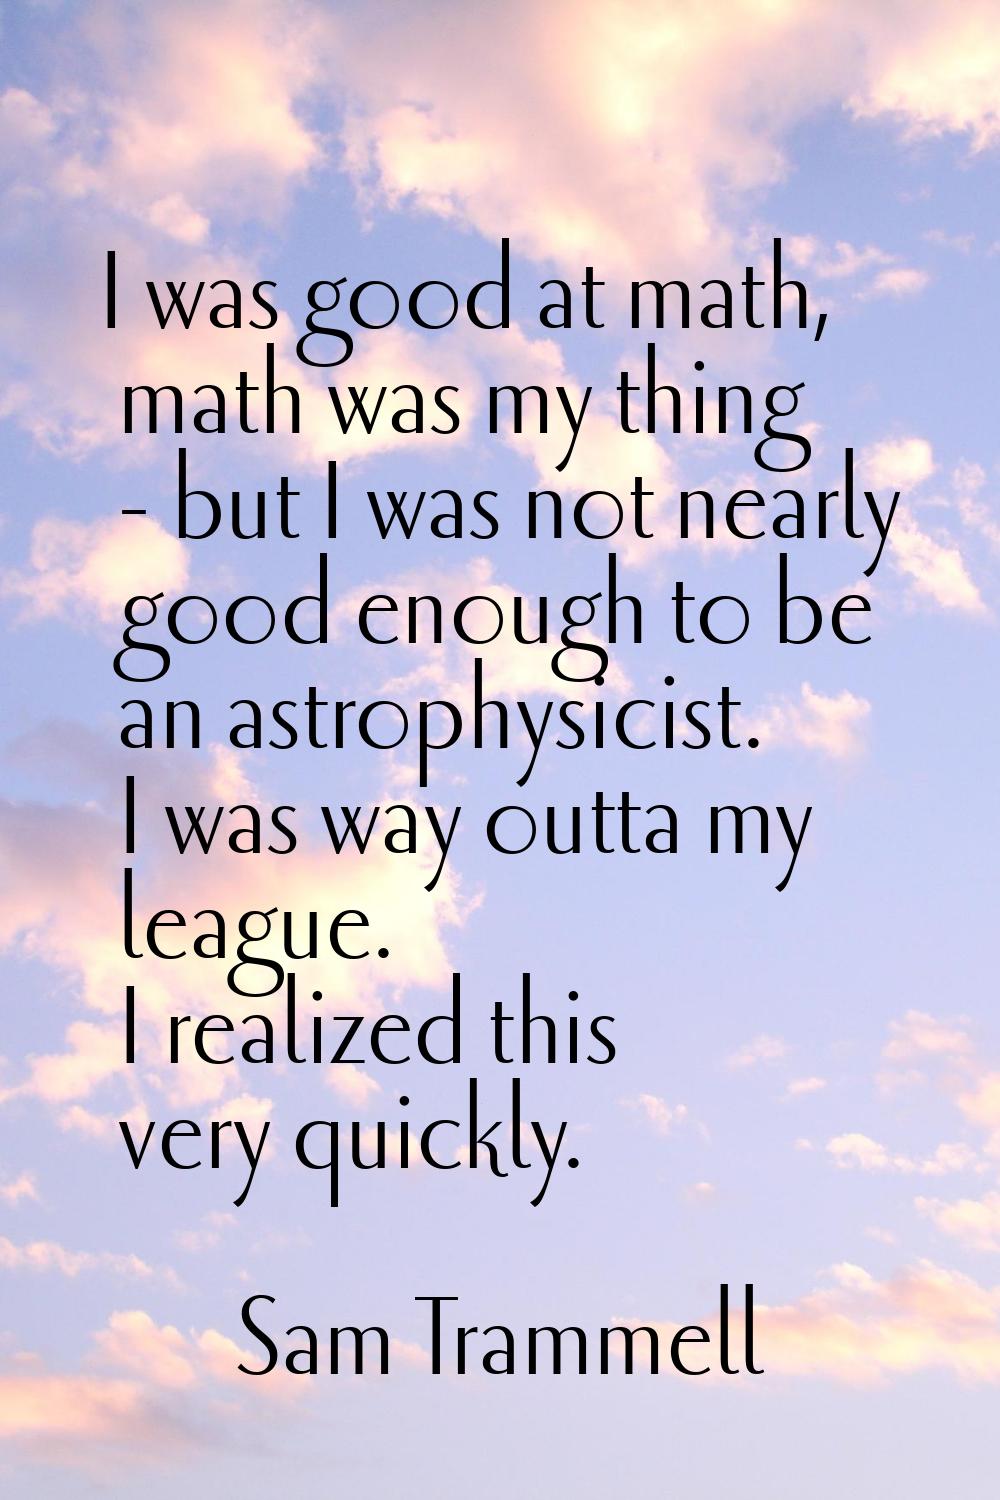 I was good at math, math was my thing - but I was not nearly good enough to be an astrophysicist. I